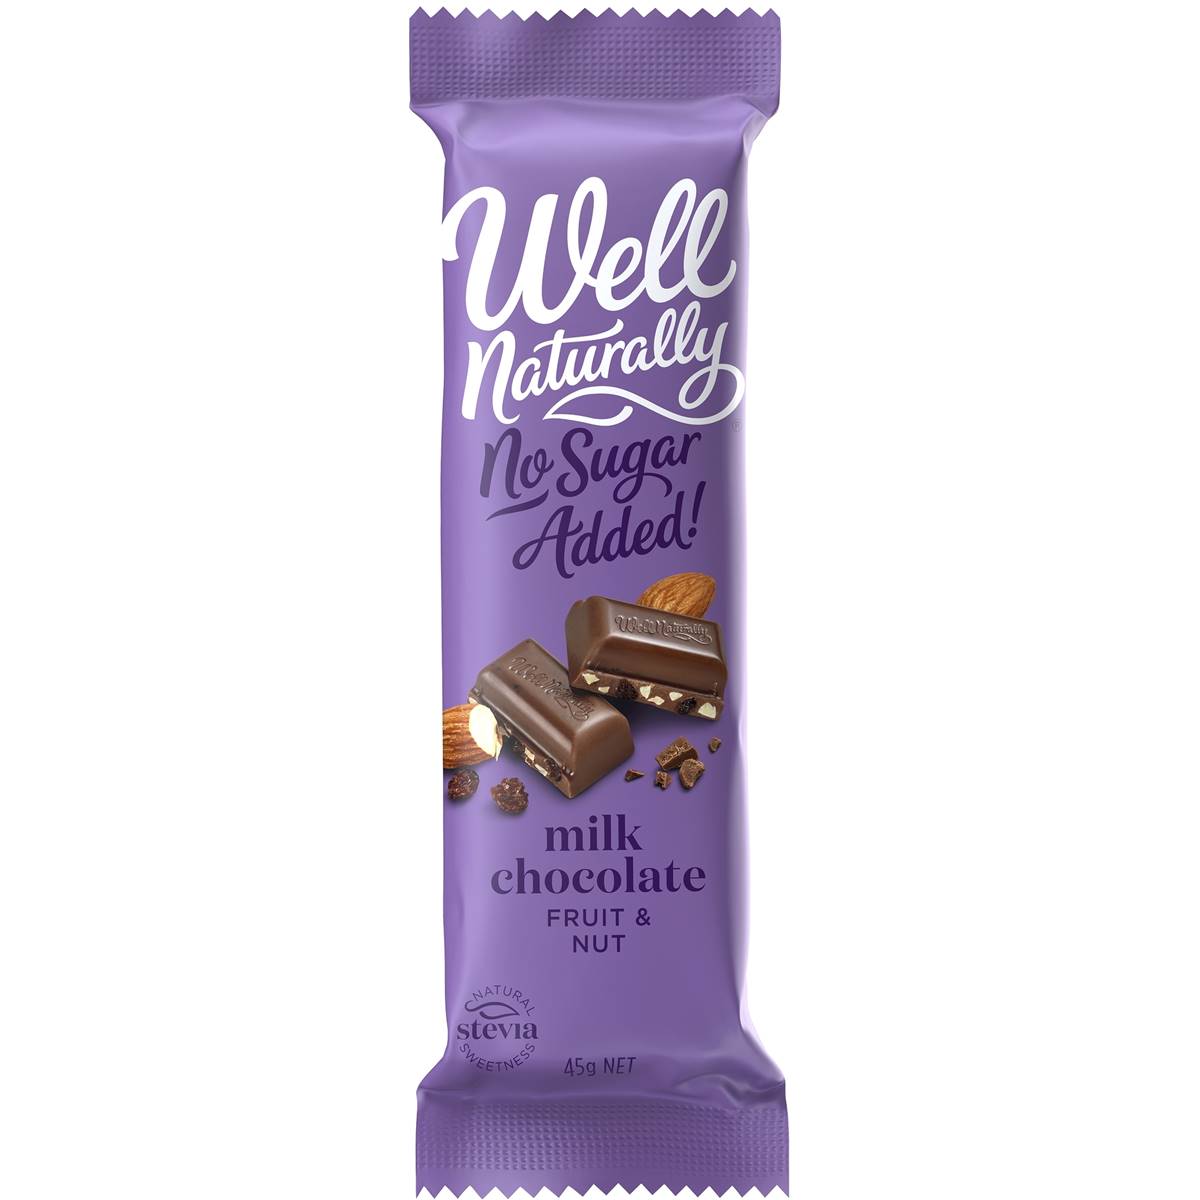 Calories in Well Naturally No Sugar Added Fruit & Nut Bar